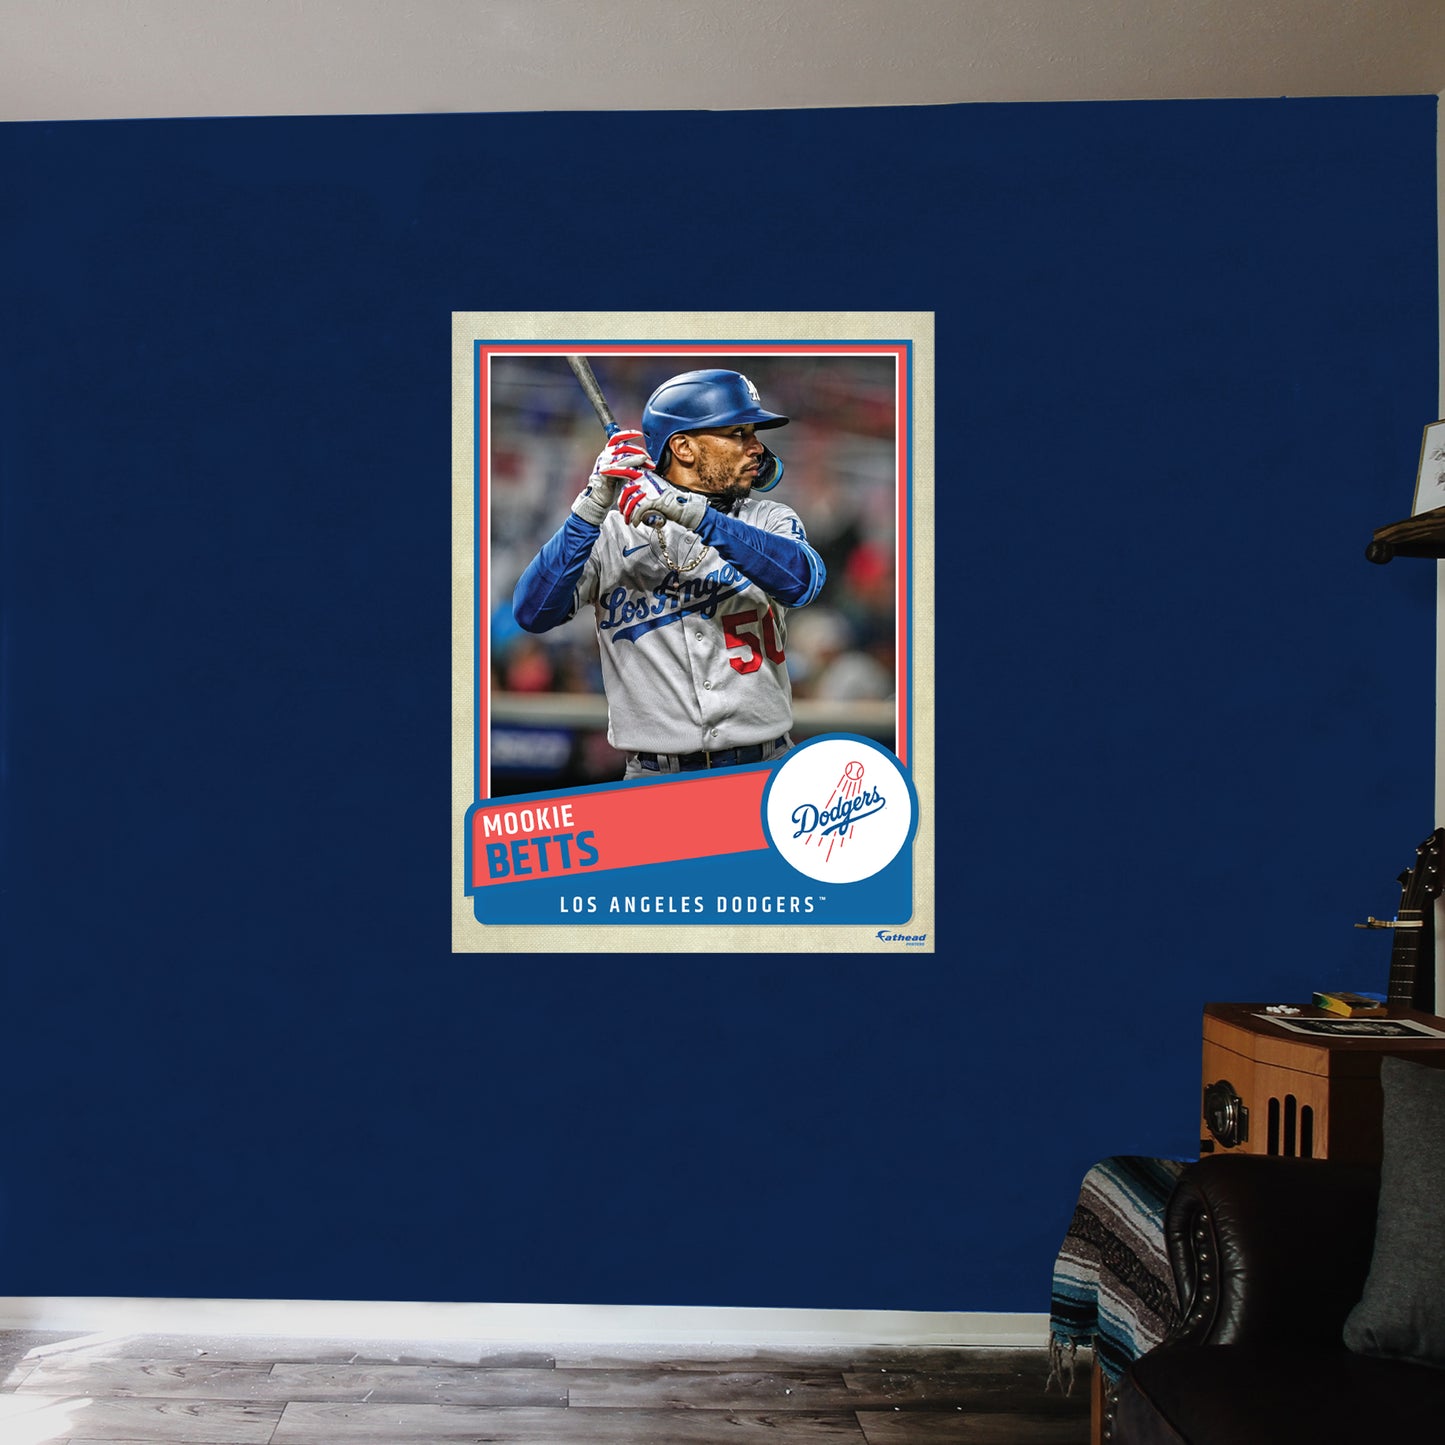 Los Angeles Dodgers: Mookie Betts  Poster        - Officially Licensed MLB Removable     Adhesive Decal